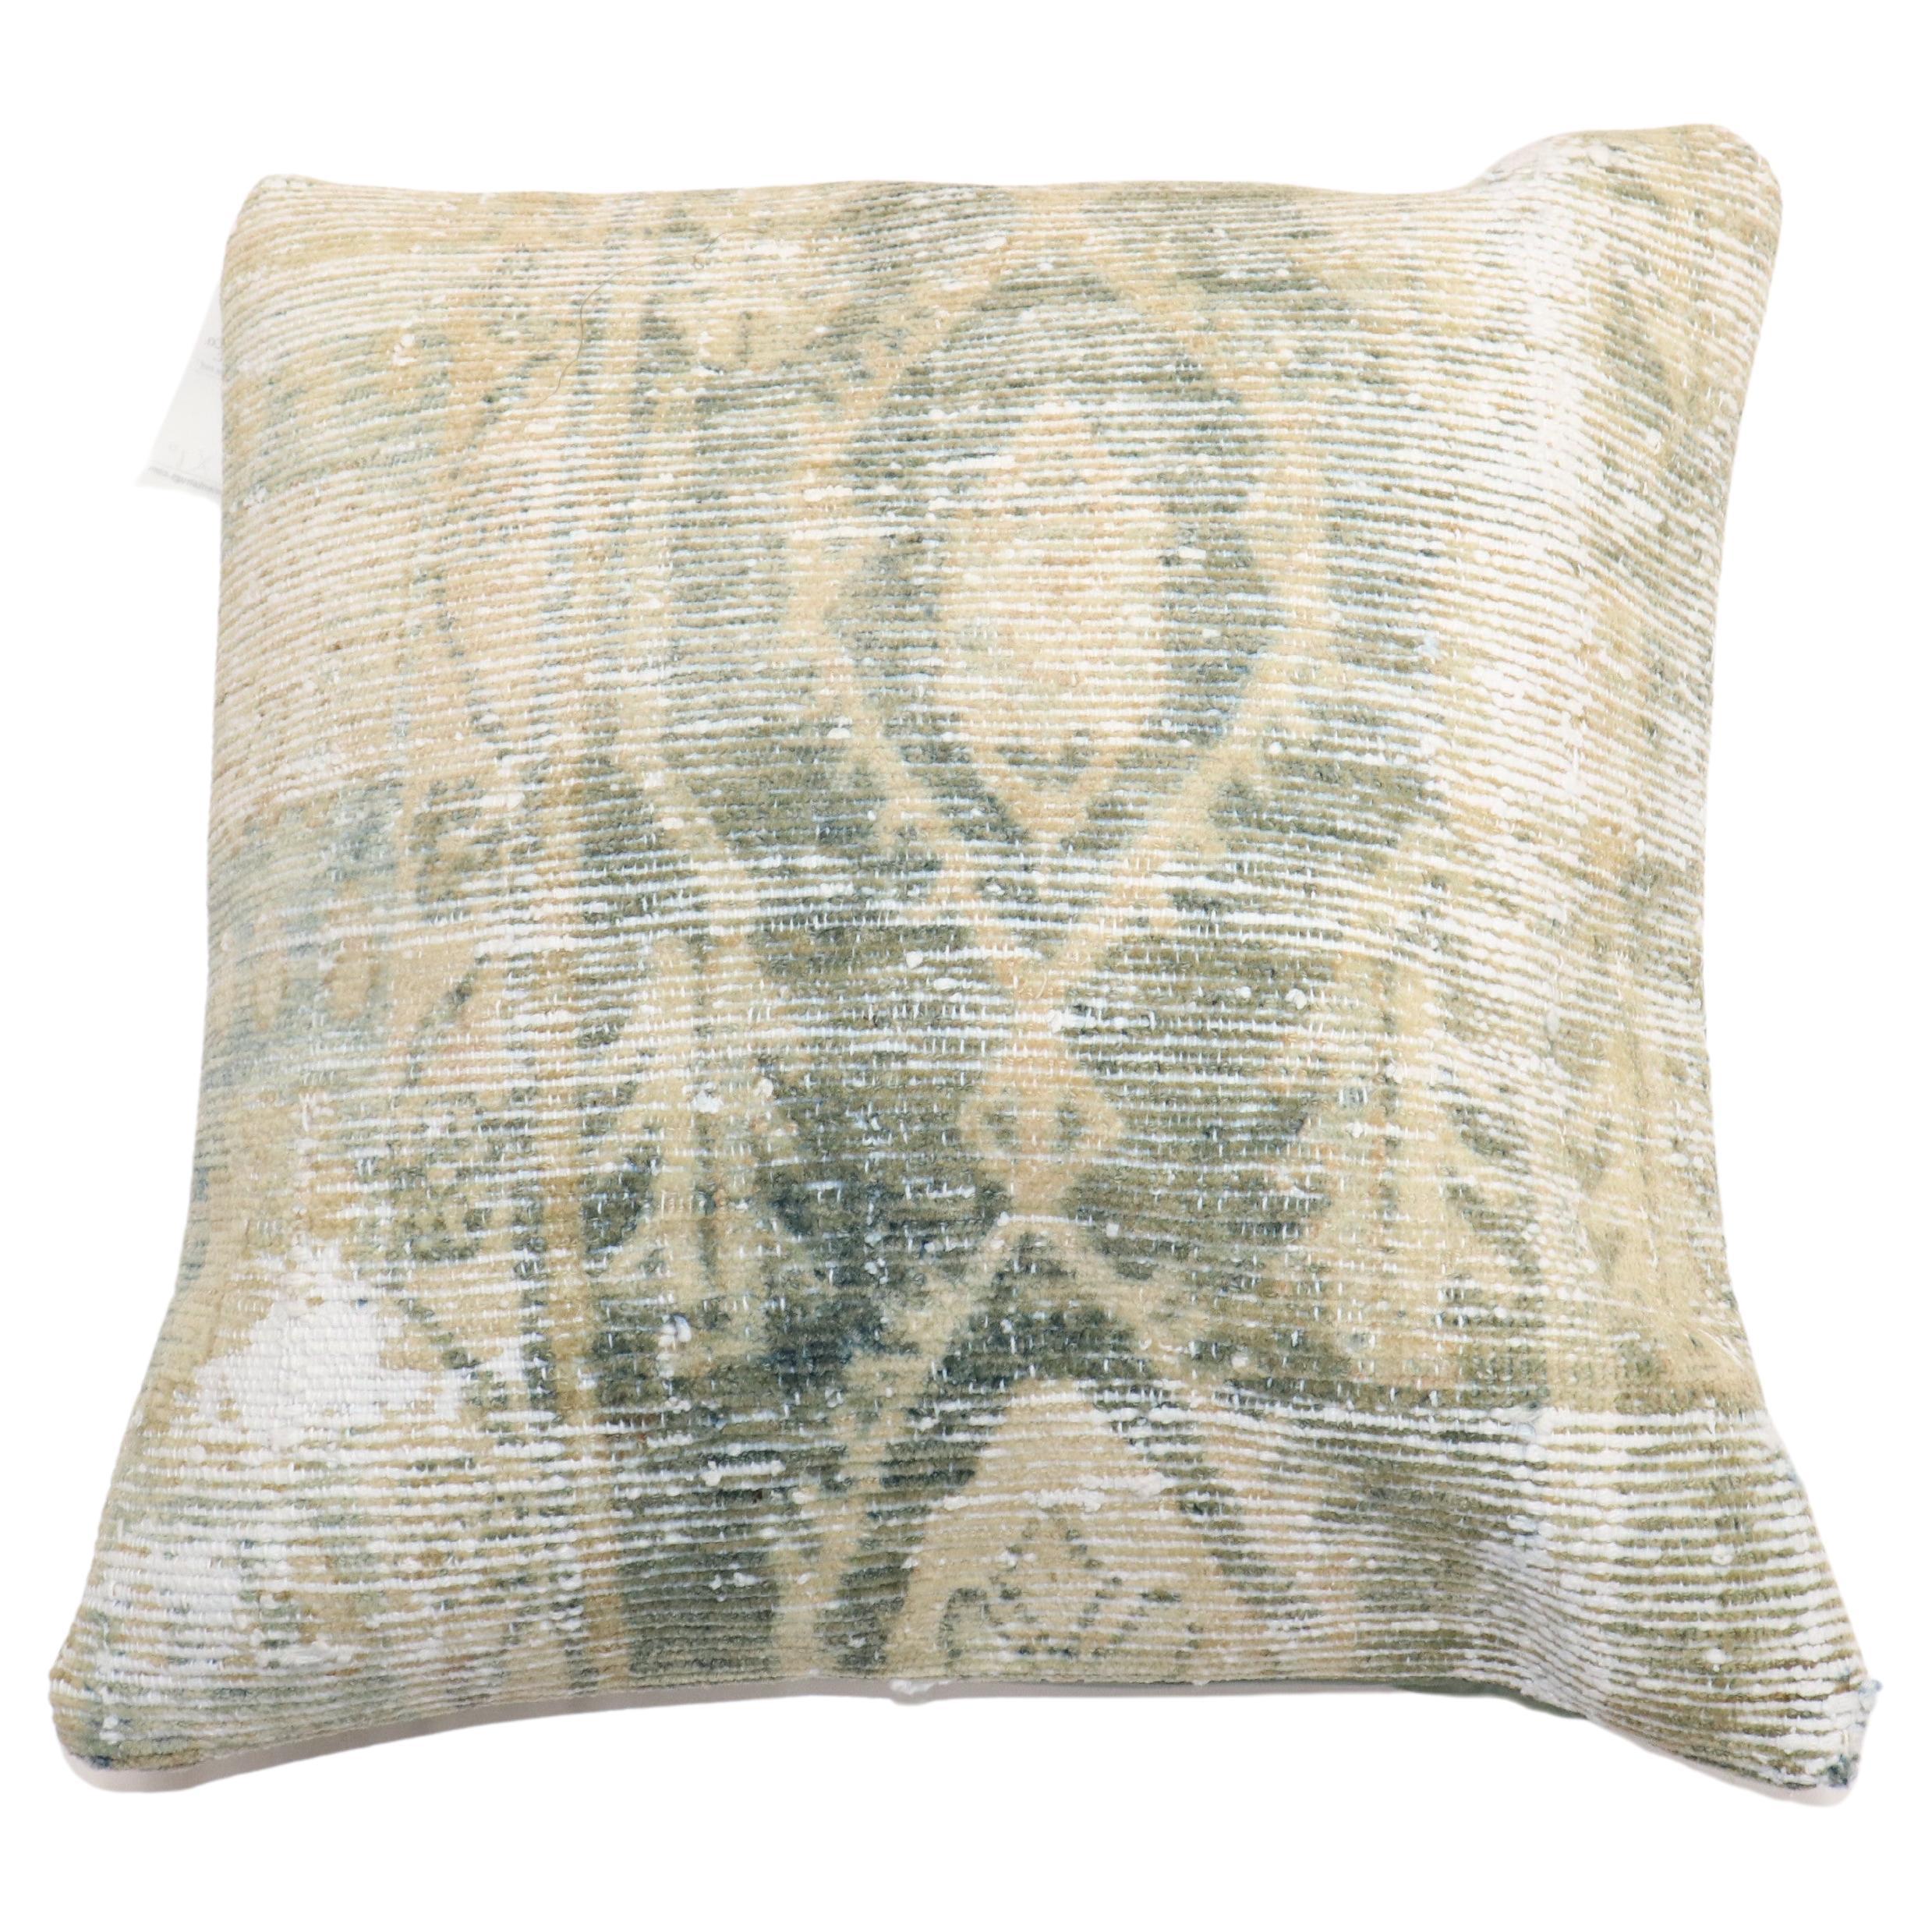 Pillow made from an antique Persian Malayer rug in pale green

Measures: 23'' x 23''.